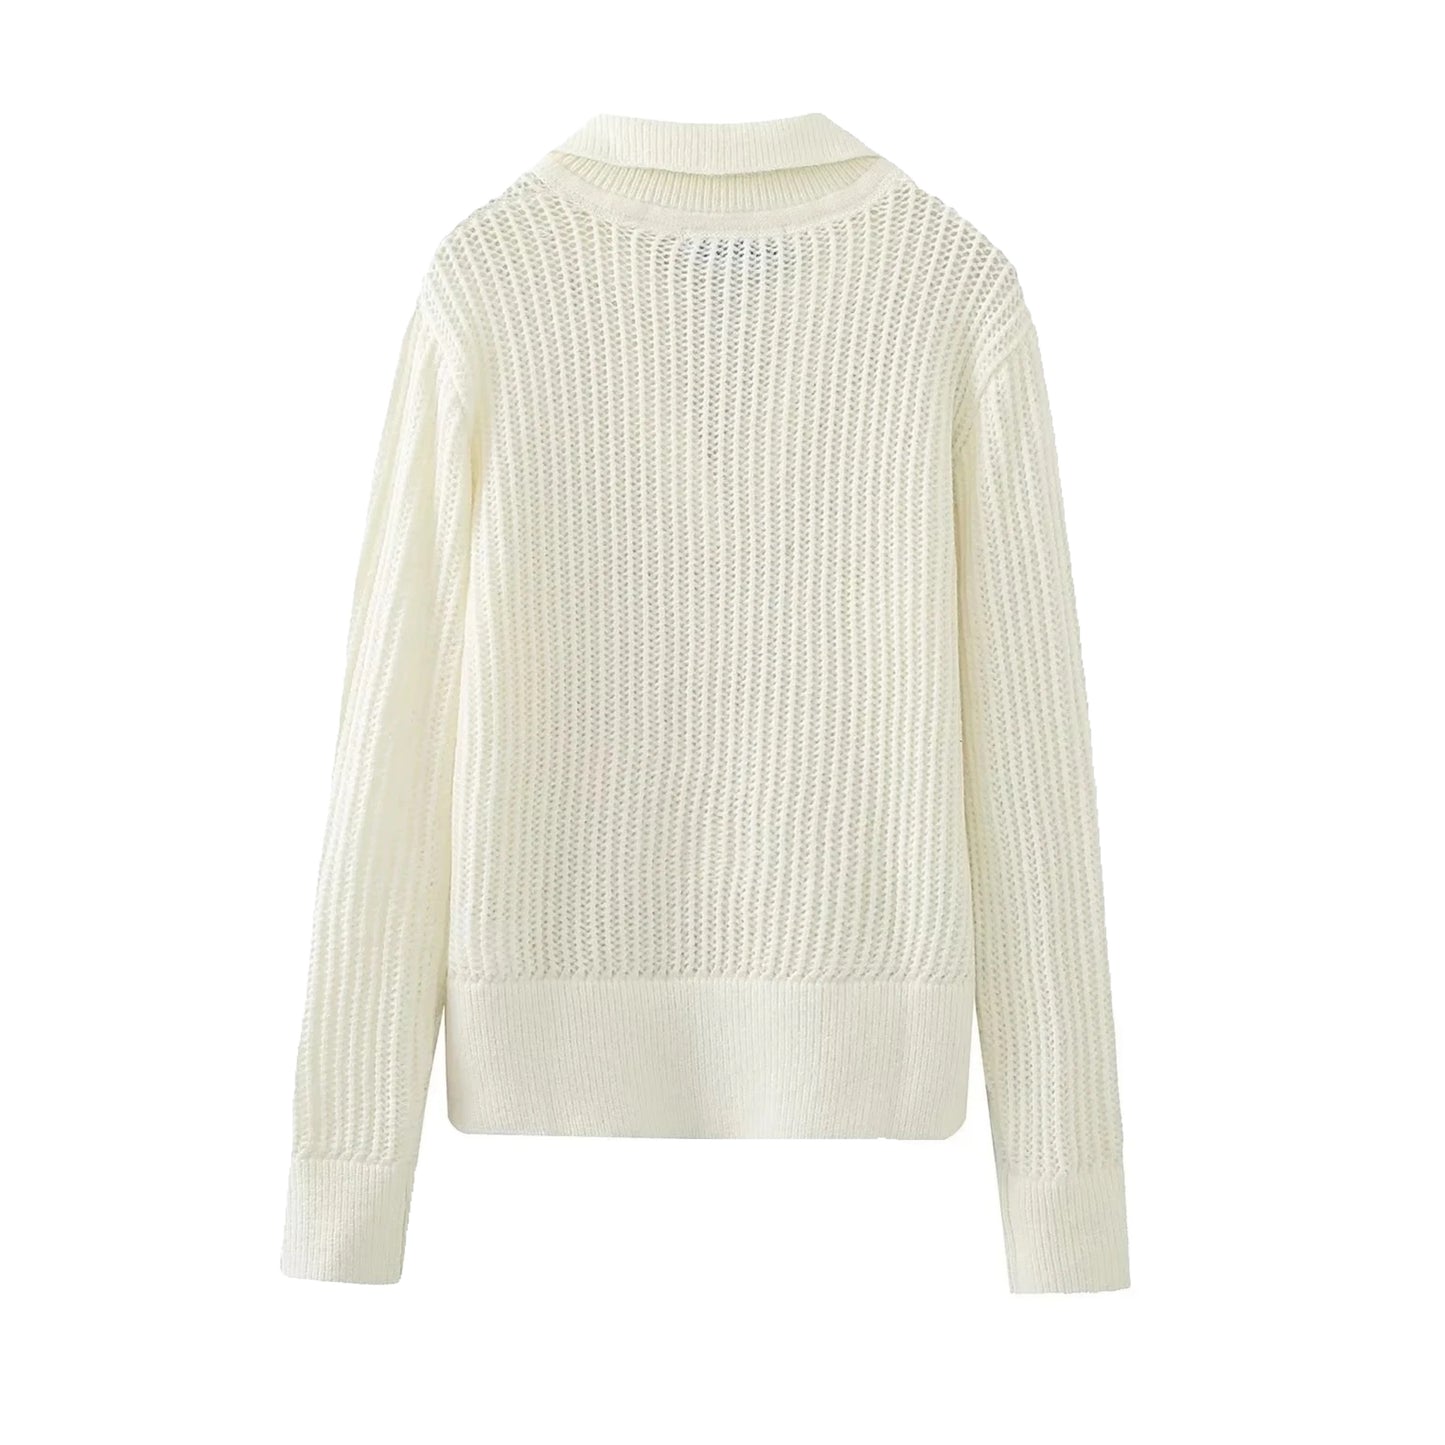 Ivory Knitted V-Neck Pullover Sweater